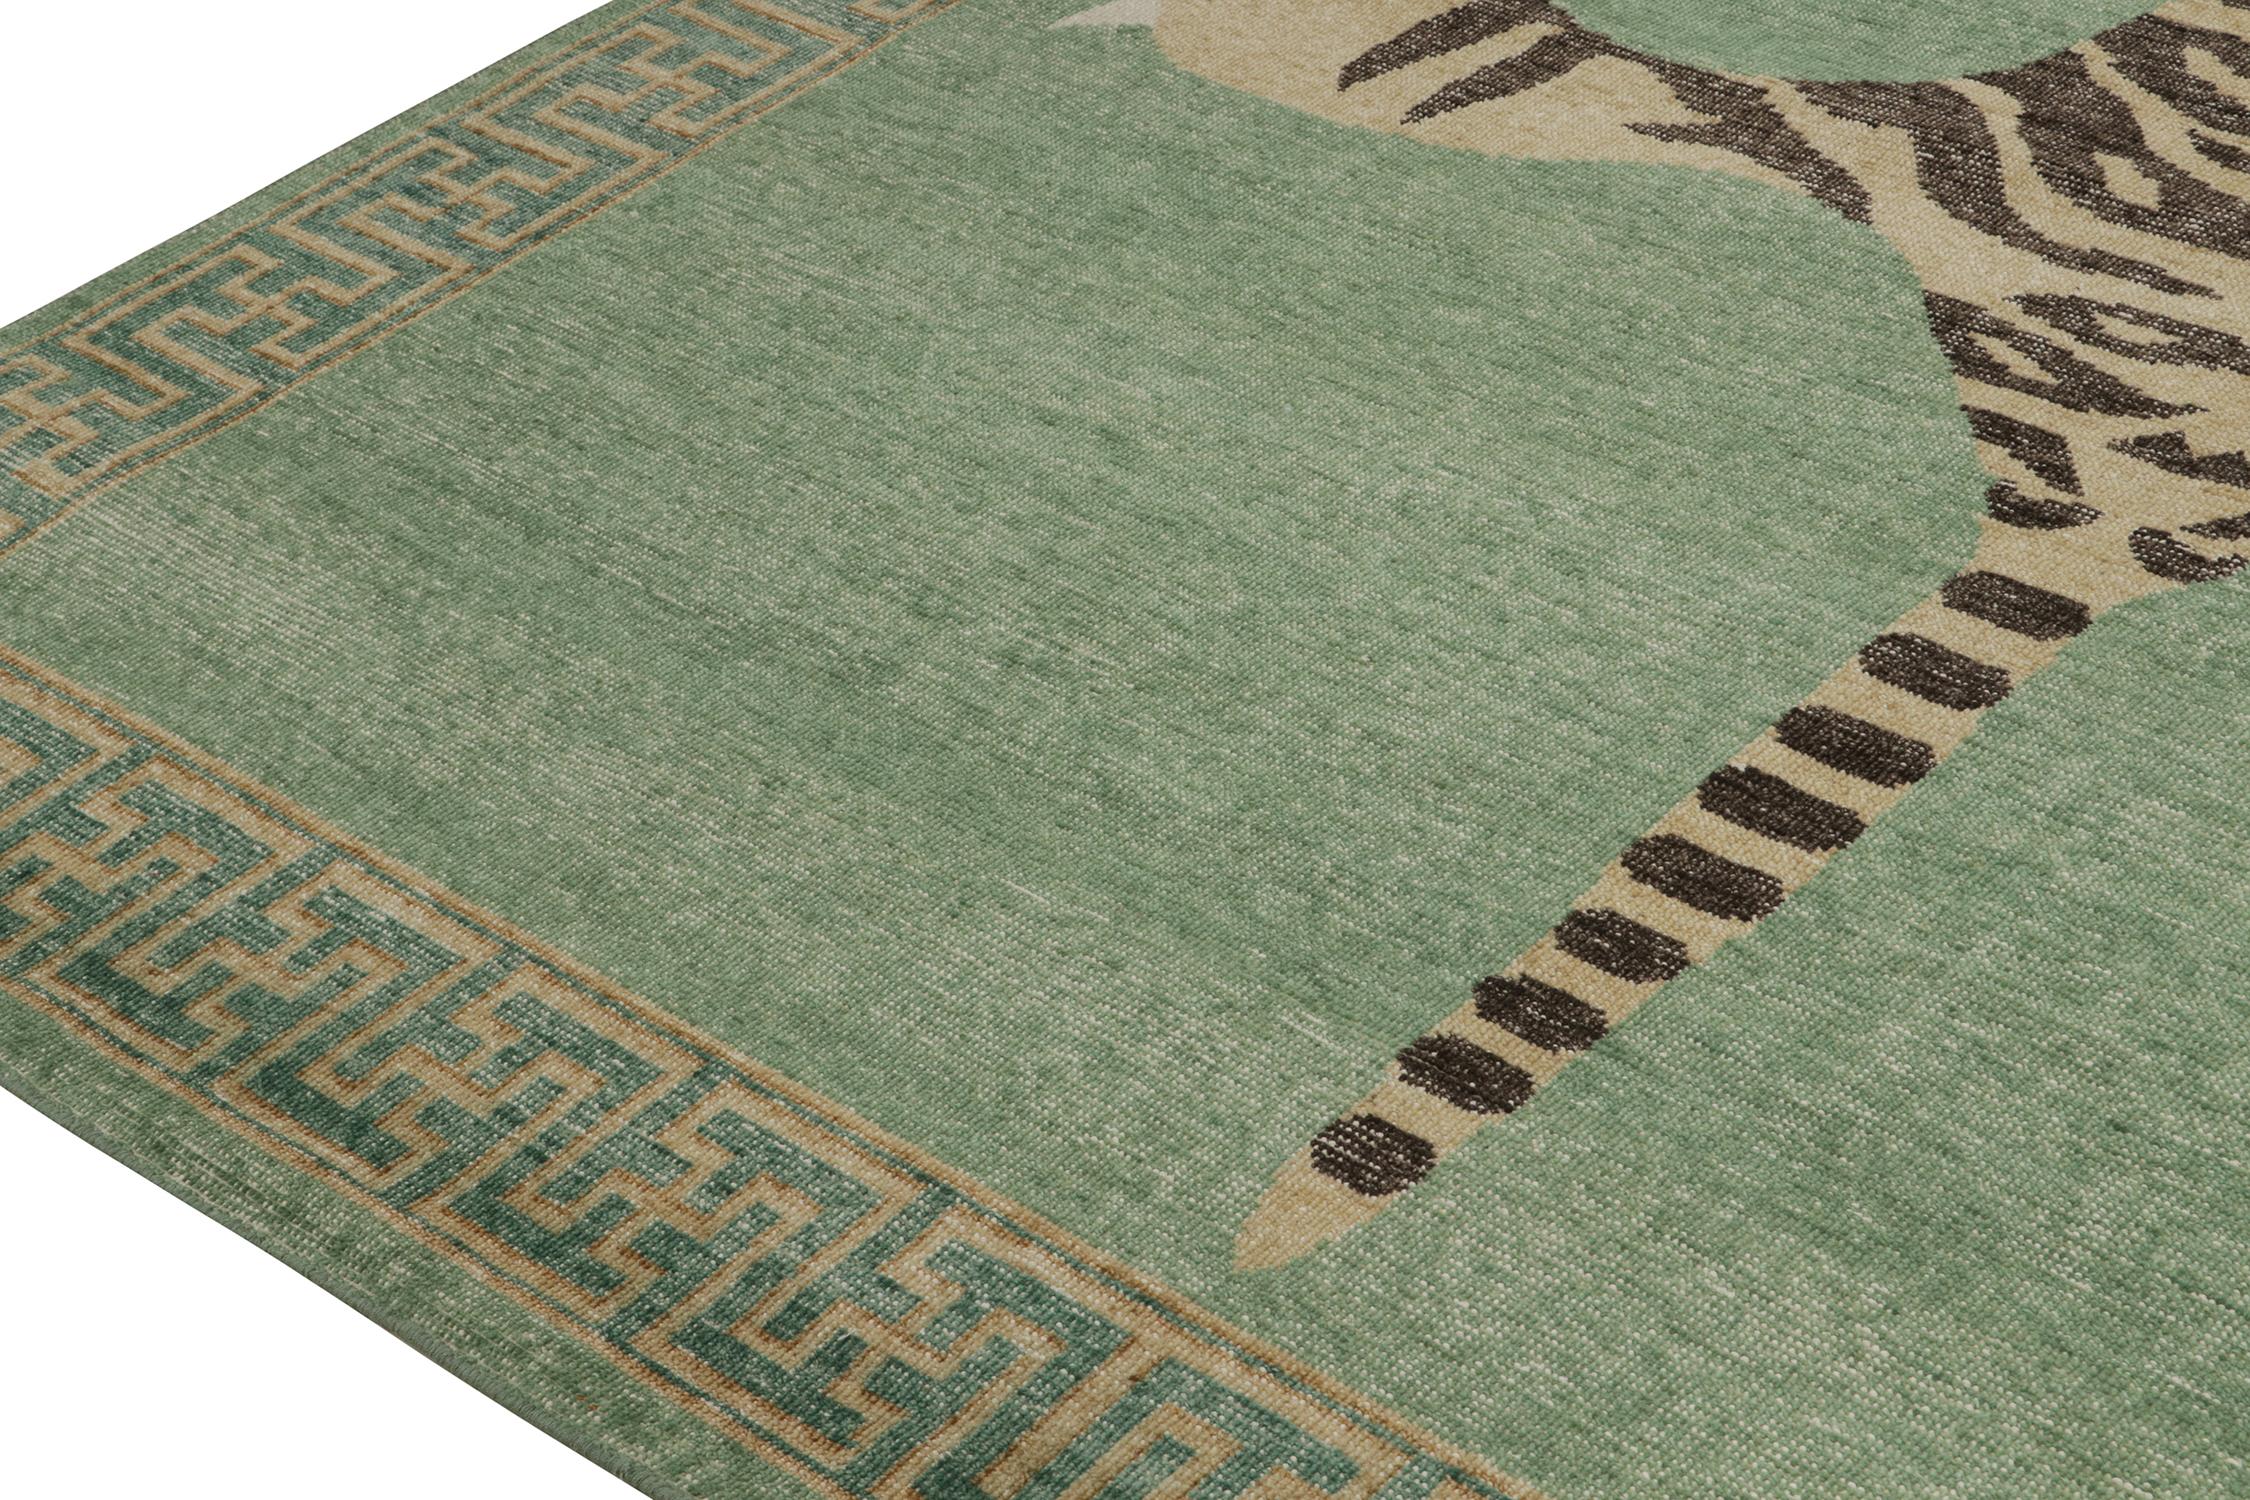 Rug & Kilim’s Distressed Style Tiger Skin Rug in Green, Beige * Black Pictorial In New Condition For Sale In Long Island City, NY